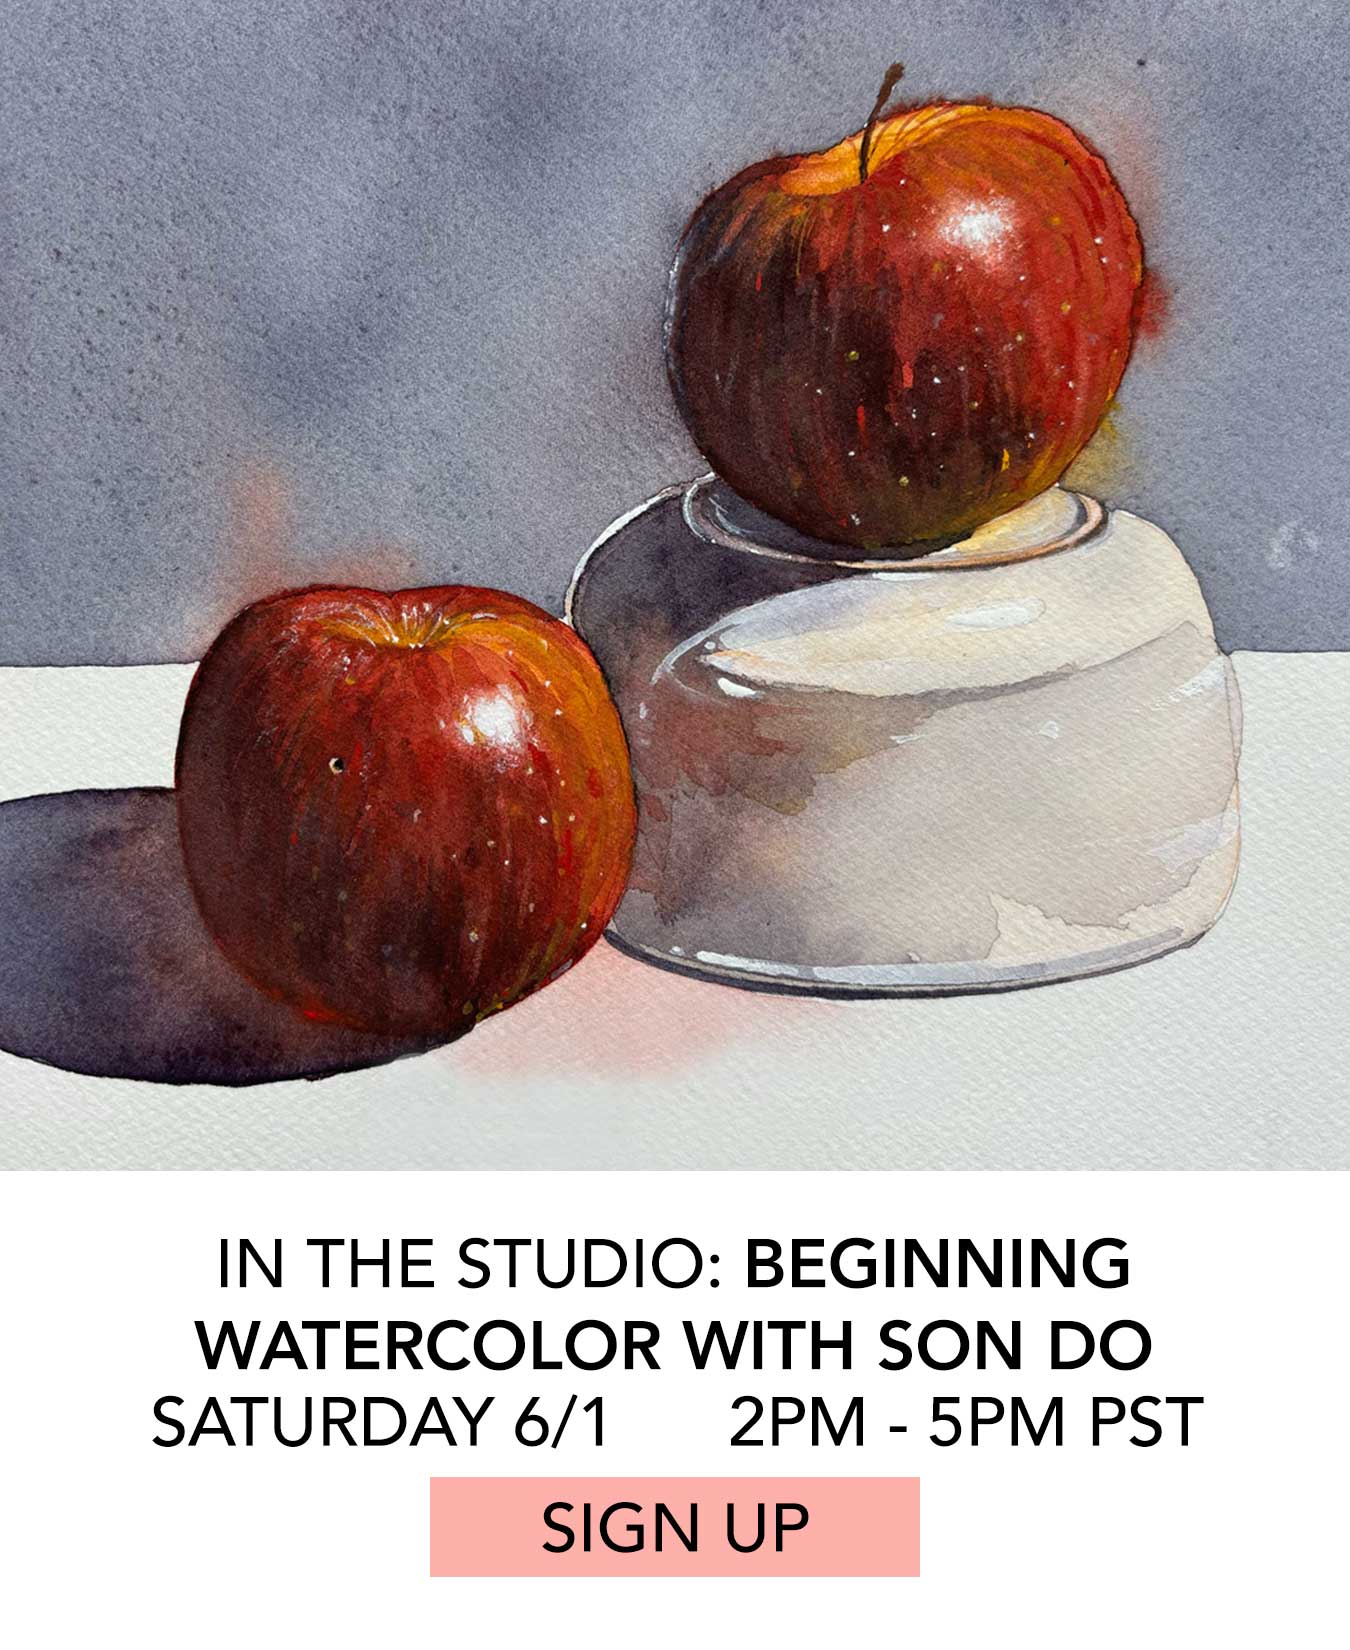 In the Studio: Beginning Watercolor with Son Do. Saturday 6/1 from 2:00pm to 5:00pm. Click to Sign Up.